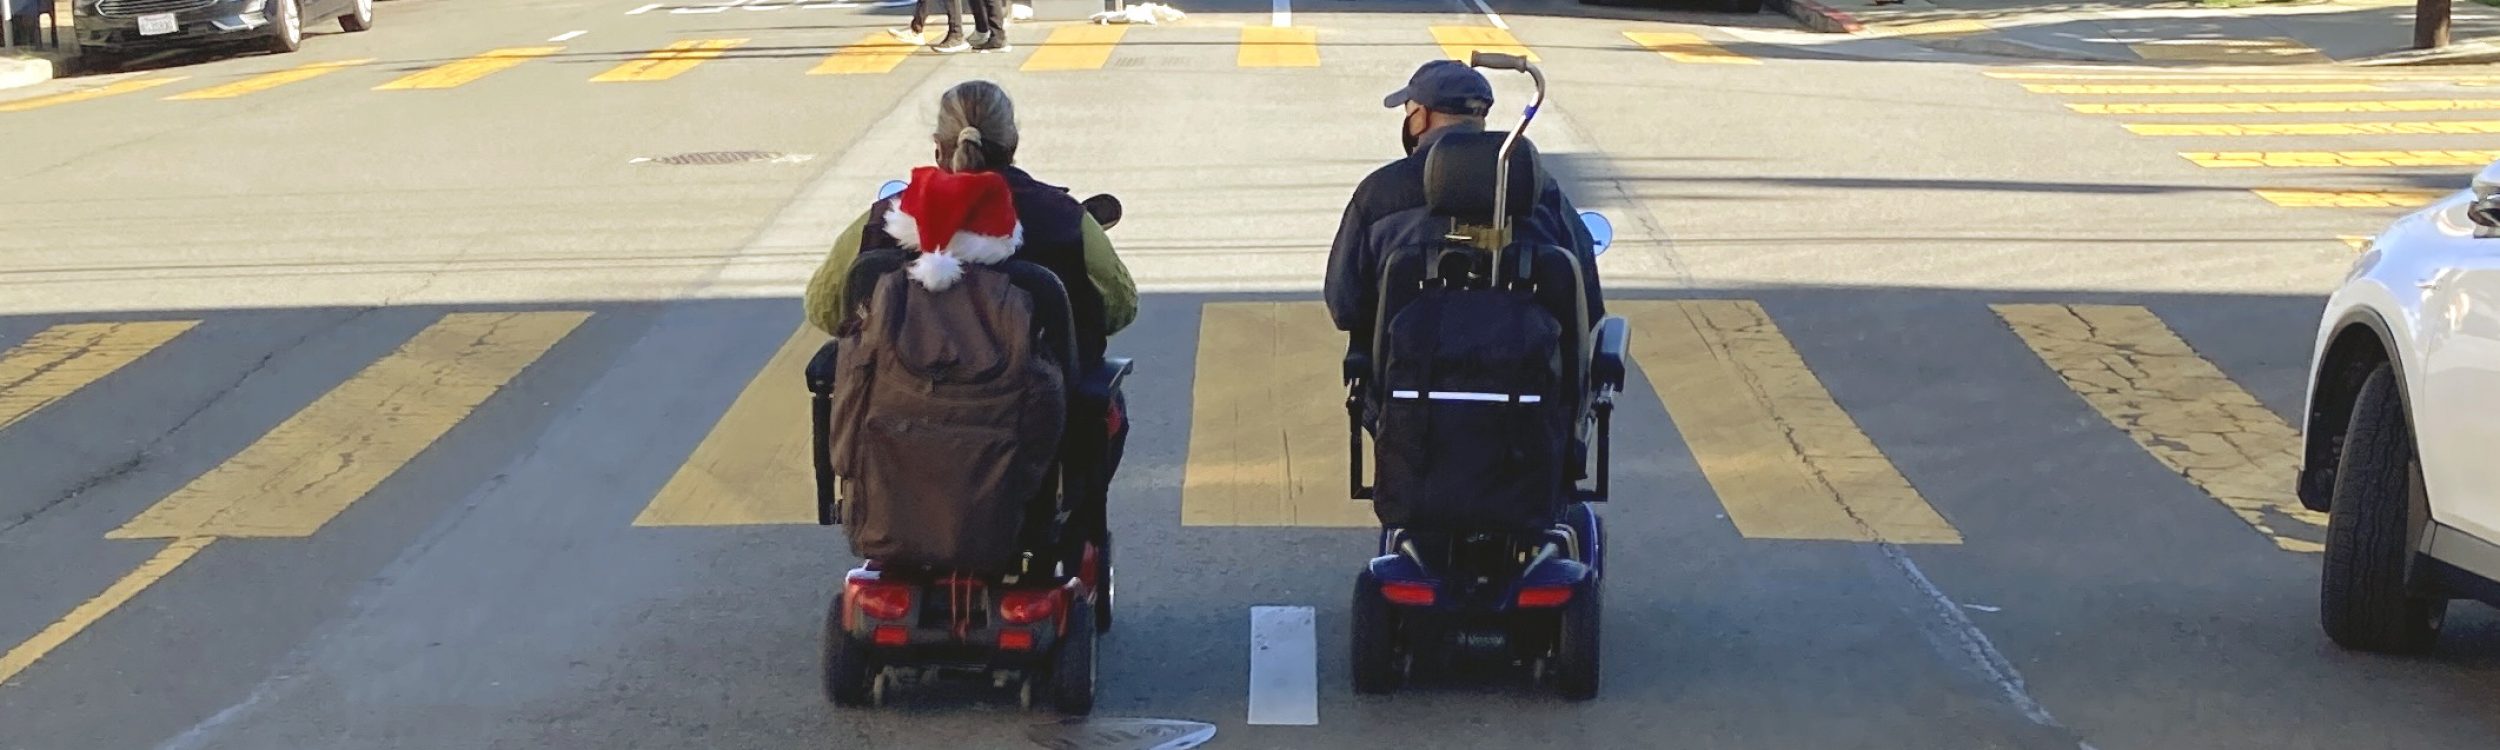 Chime in on how to make Slow Streets great for seniors and people with disabilities